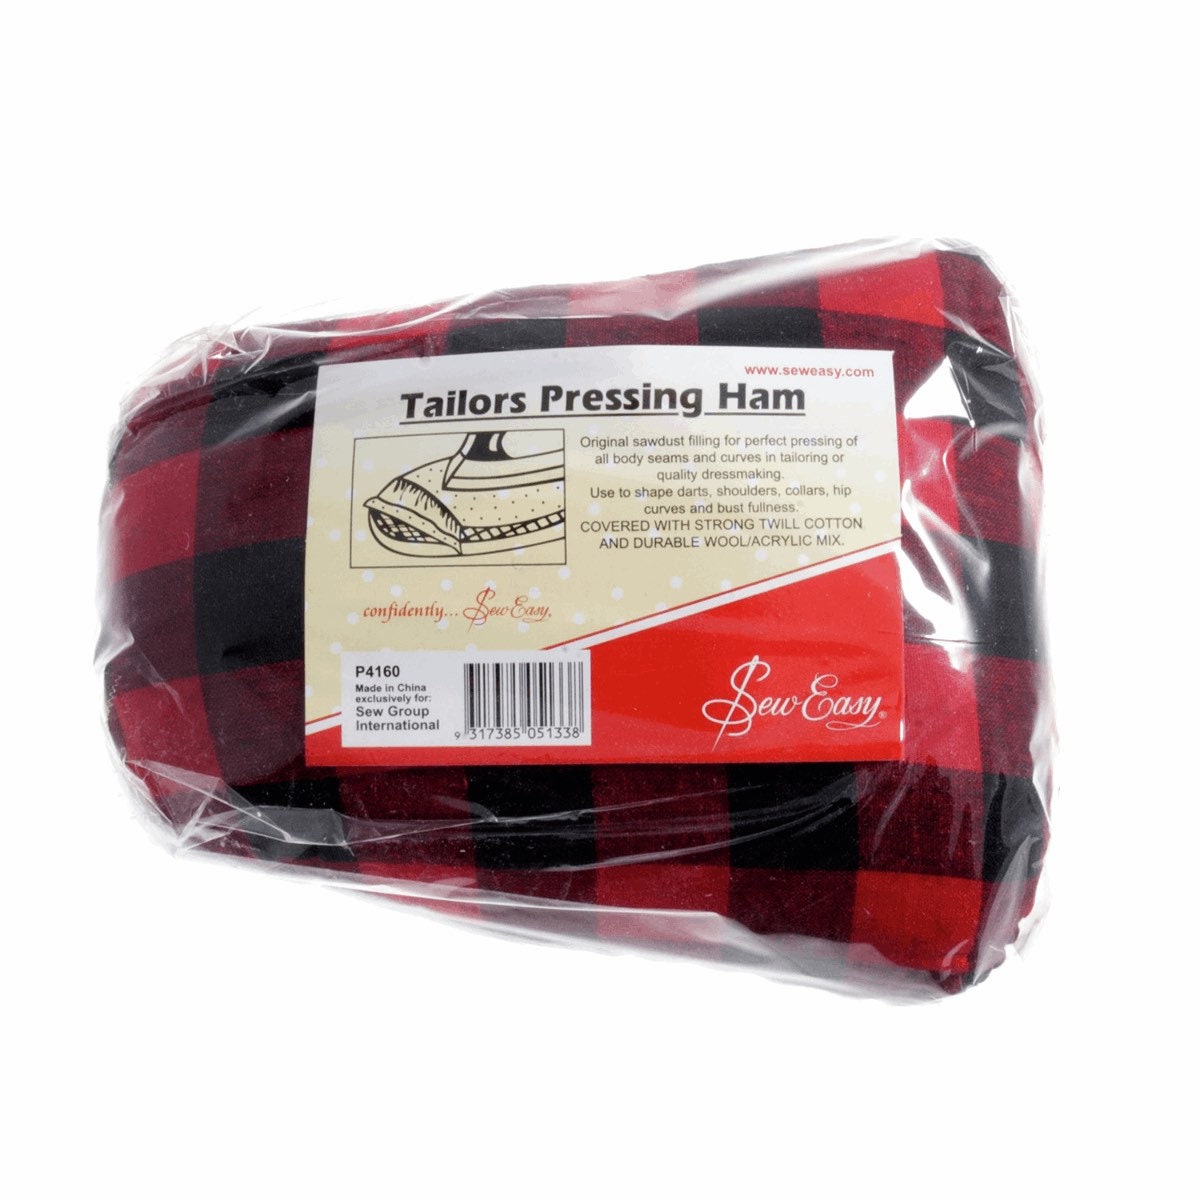 How to make a tailors ham (from scratch) - complete instructions